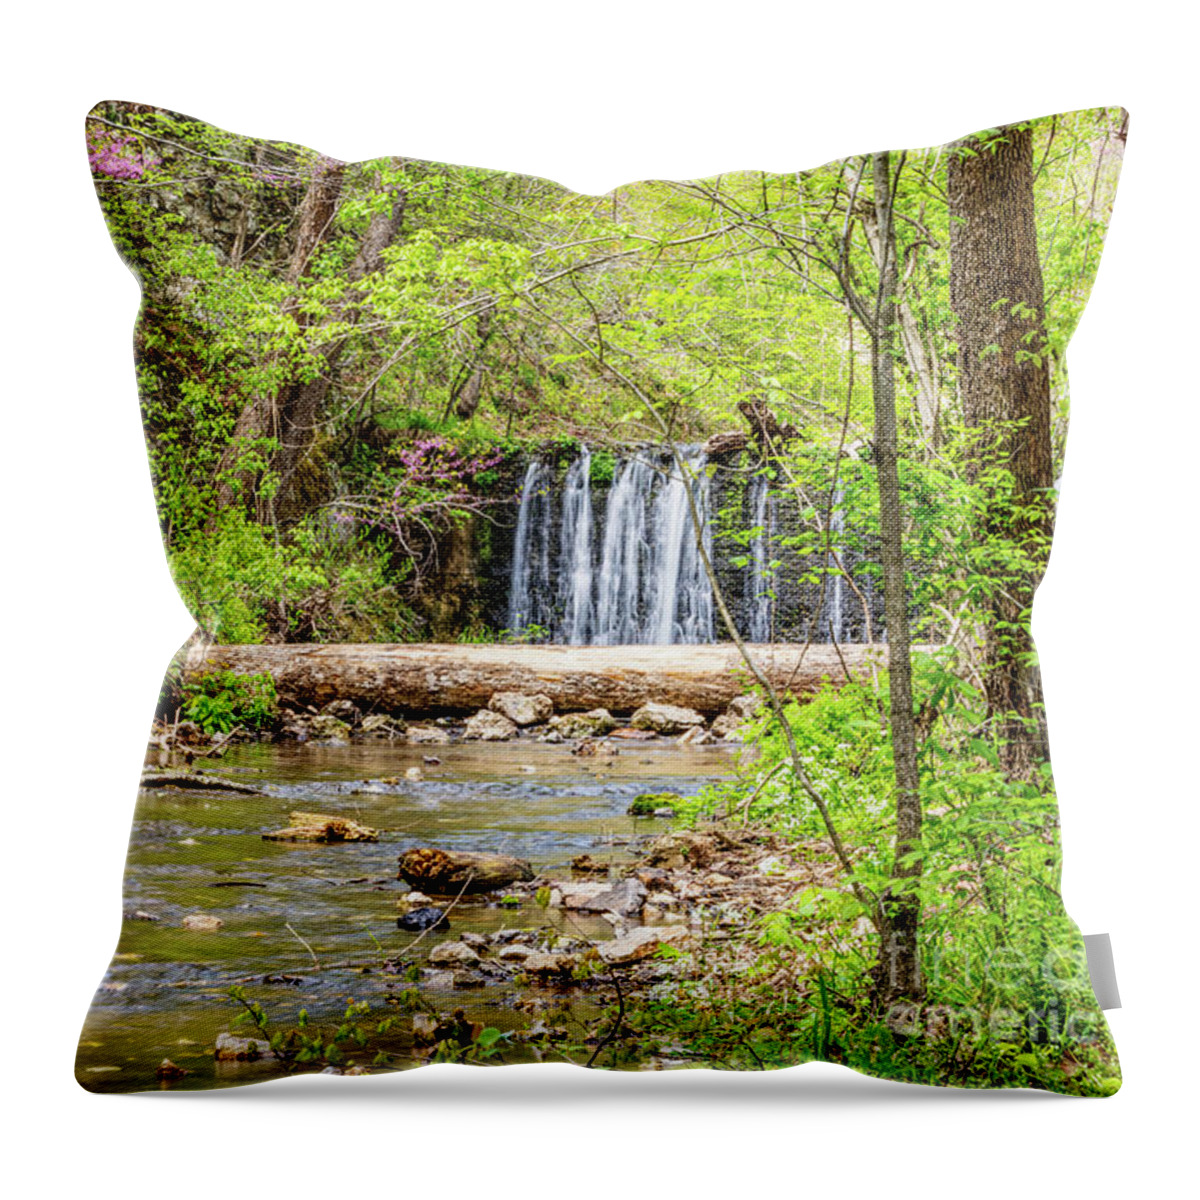 Natural Falls State Park Throw Pillow featuring the photograph Waterfall Along Dripping Springs Branch by Jennifer White